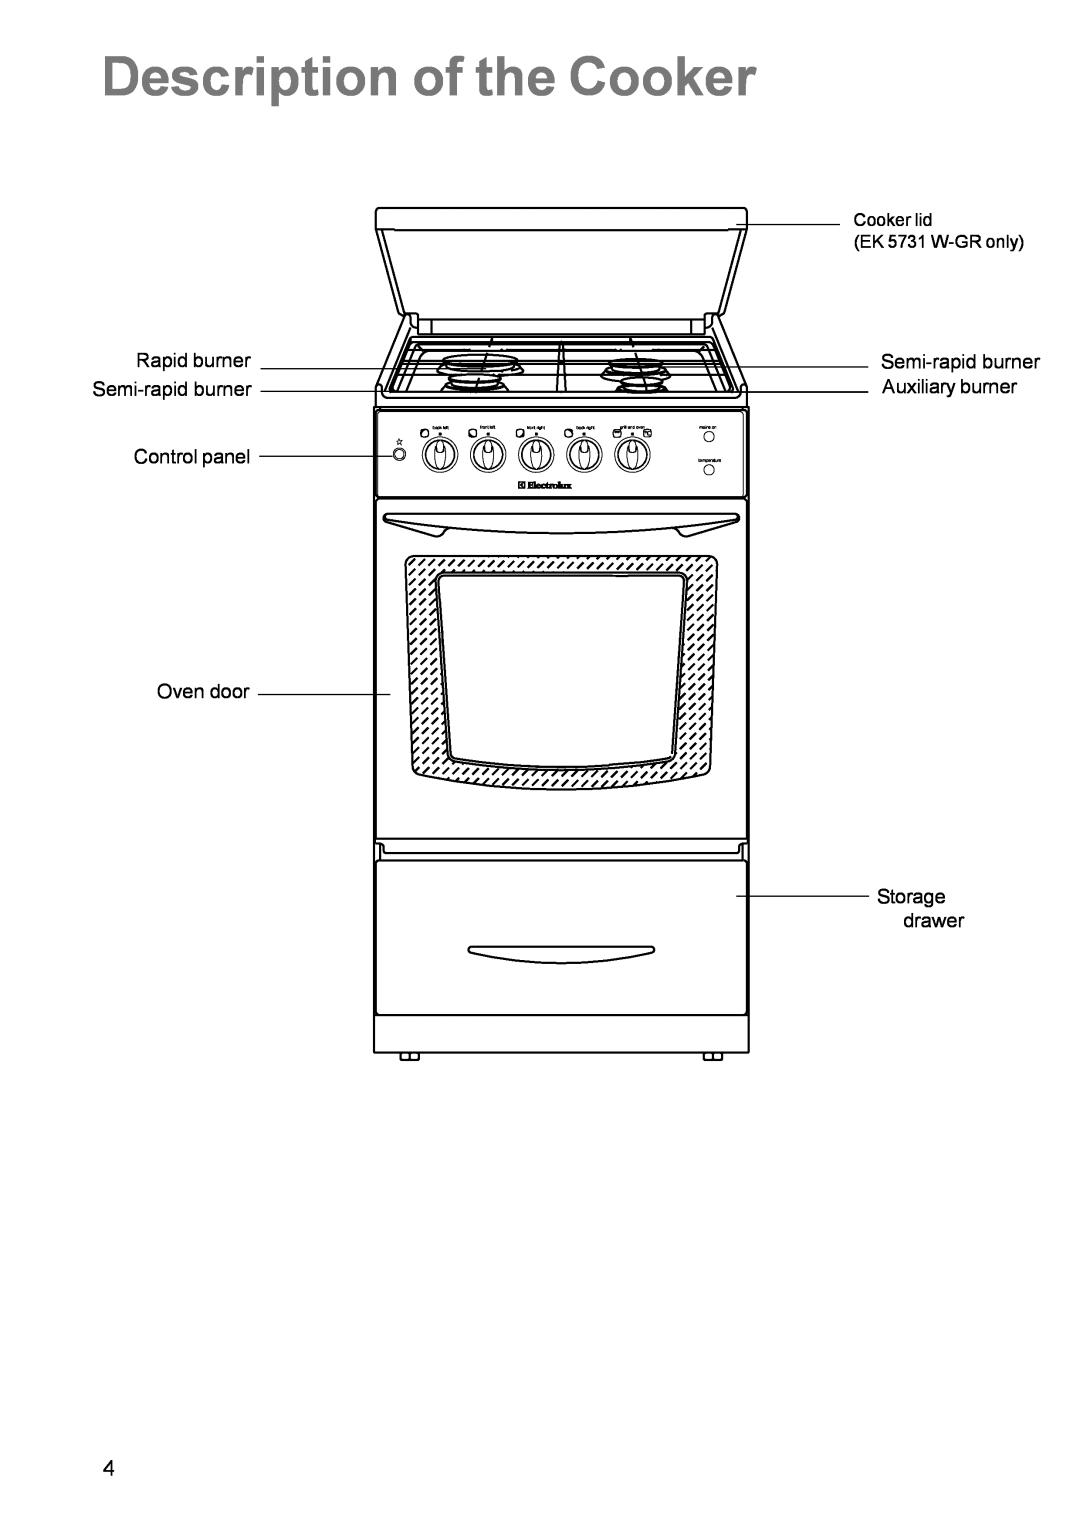 Electrolux EK 5731 Description of the Cooker, back left, front left, front right, back right, grill and oven, temperature 